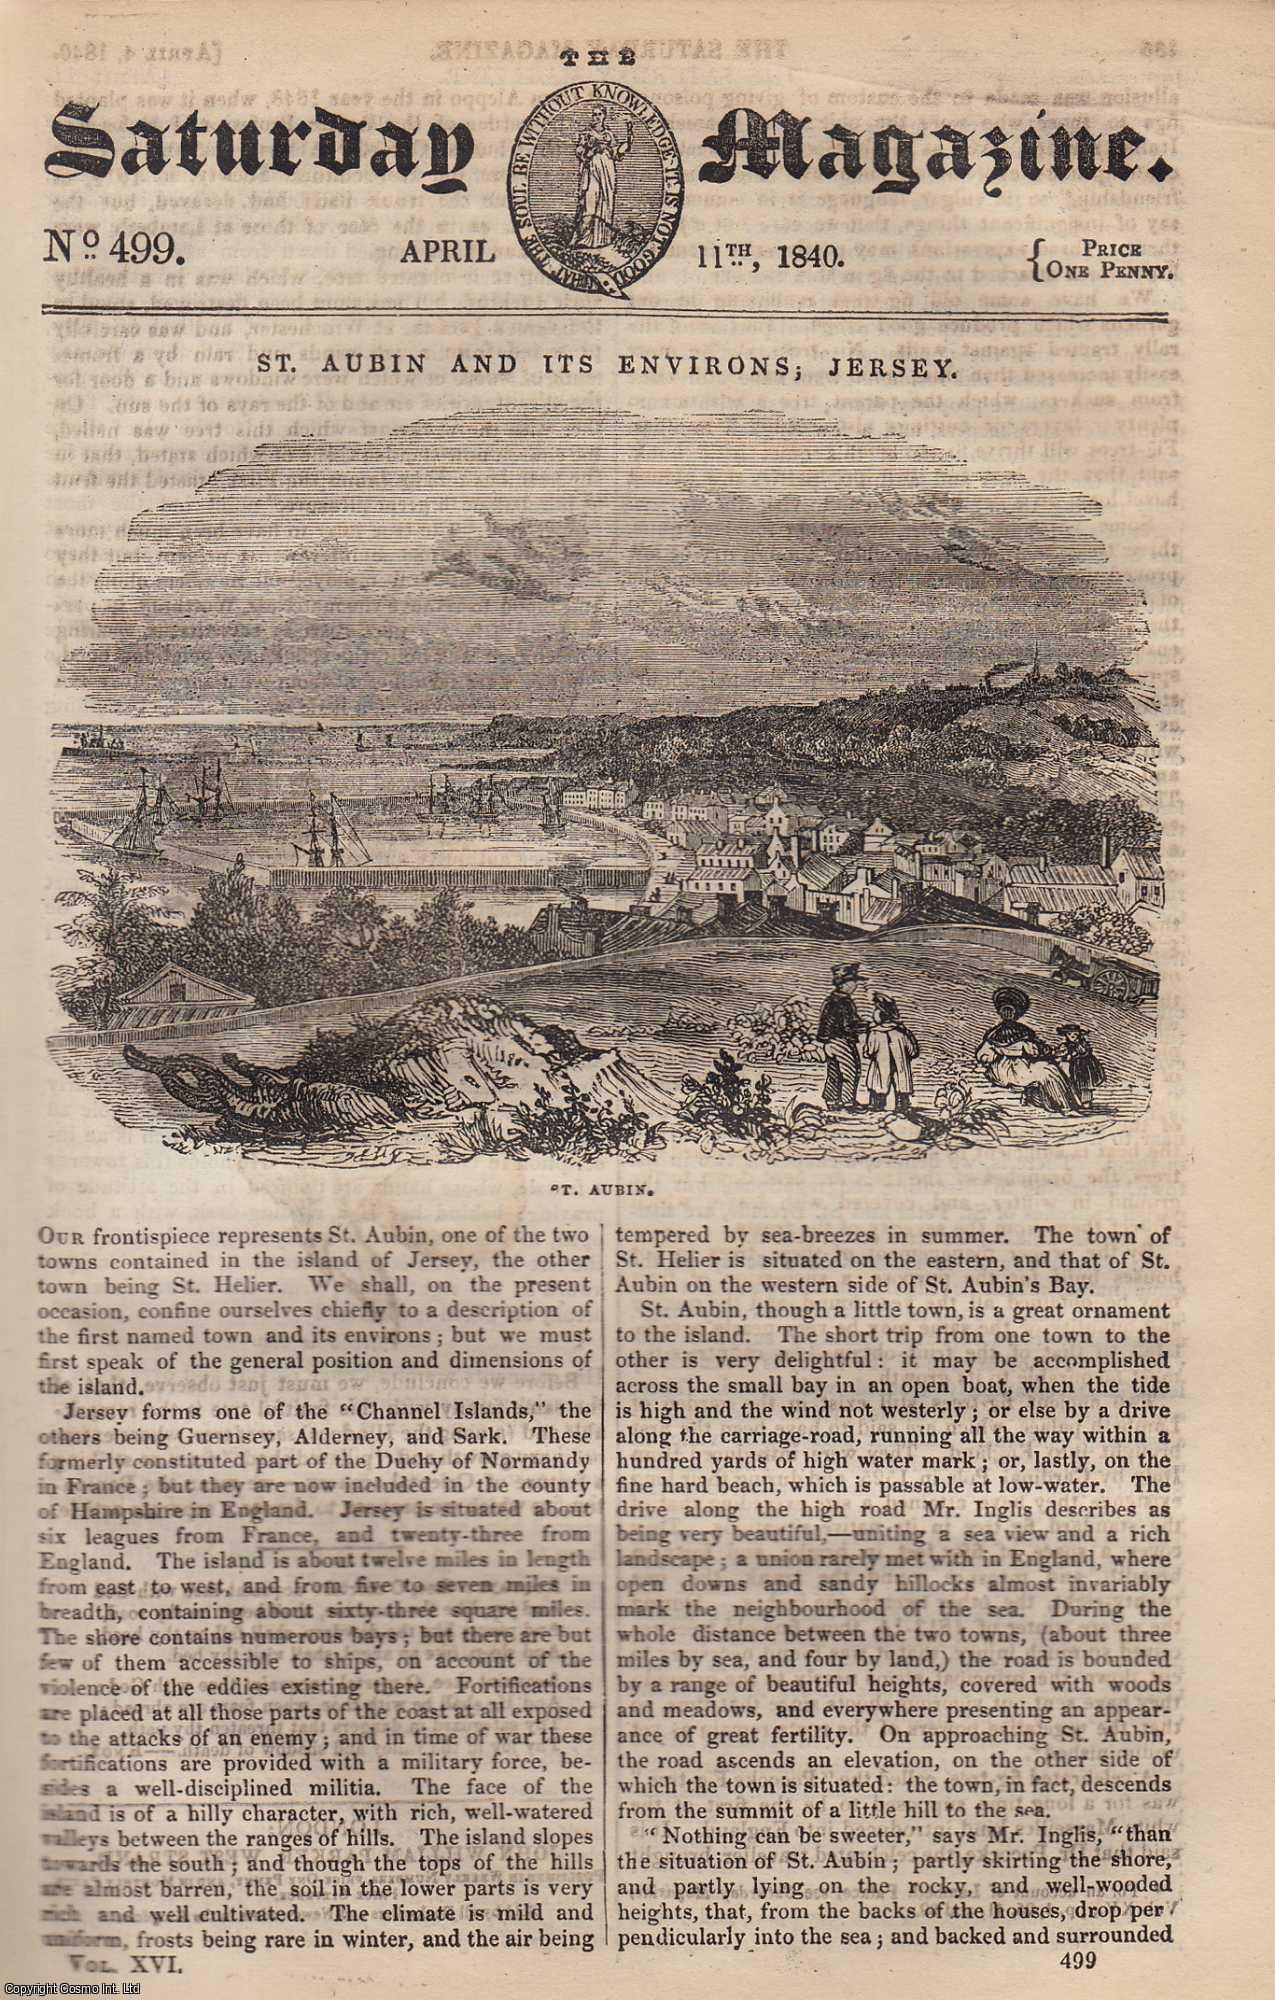 Saturday Magazine - St. Aubin and its Environs, Jersey; The Persian (water) Wheel; The Stag Beetle (Lucanus Cervus). Issue No. 499. April, 1840. A complete rare weekly issue of the Saturday Magazine, 1840.